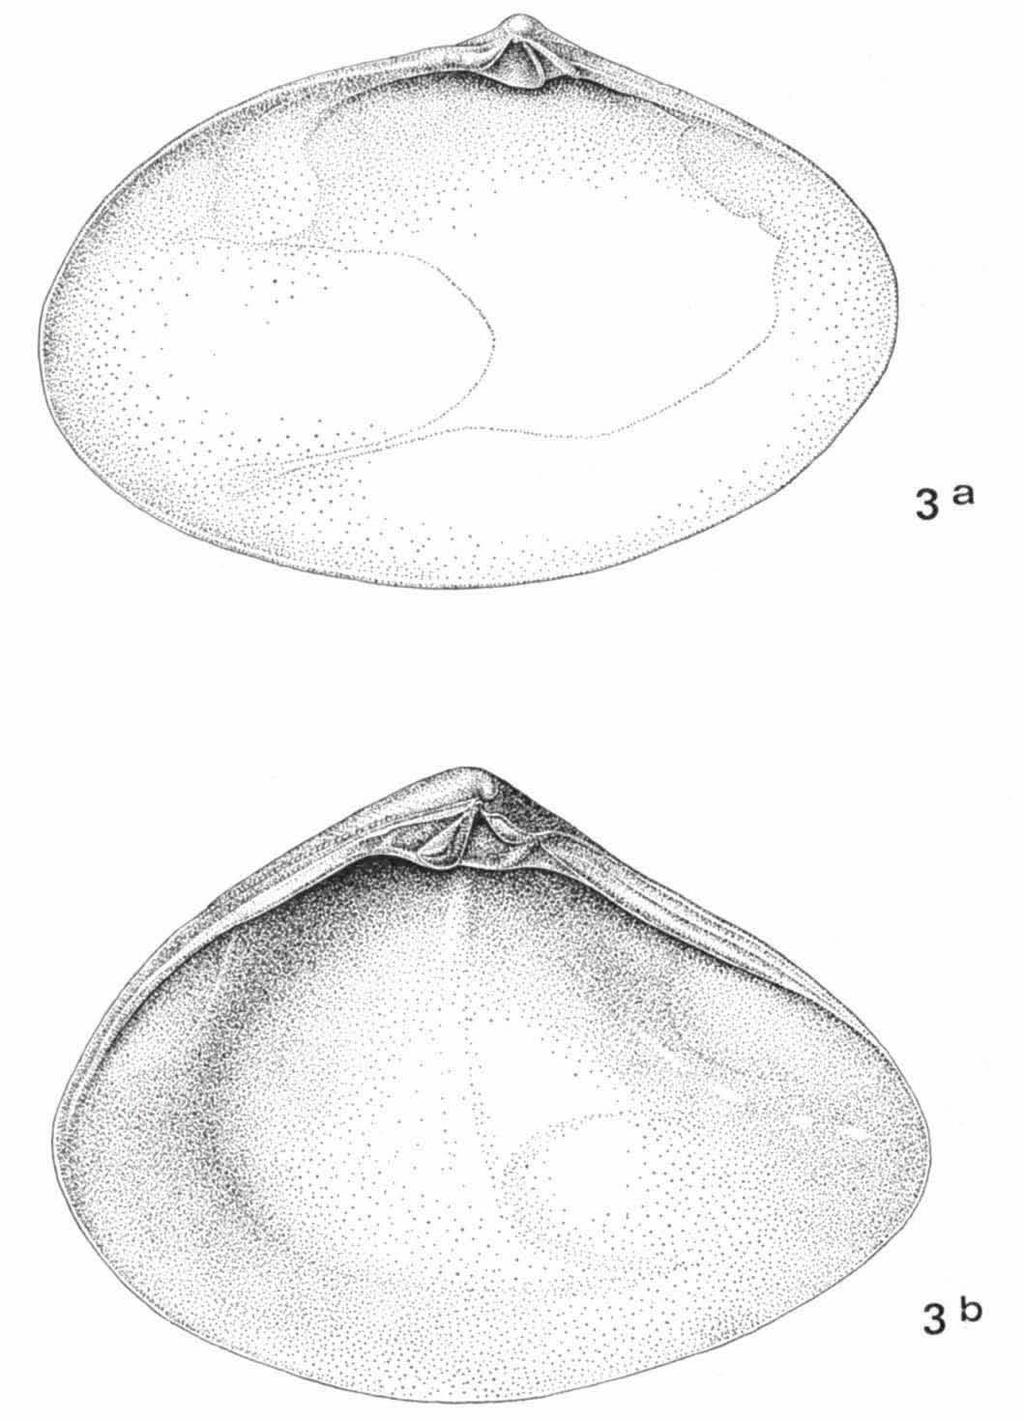 DE ROOIJ-SCHUILING, MESODESMATIDAE 6l Fig. 3. Ervilia nitens (Montagu), a, left valve of lectotype of E. maculosa Dall, natural size 47 X з.о mm; b, right valve of holotype of E.